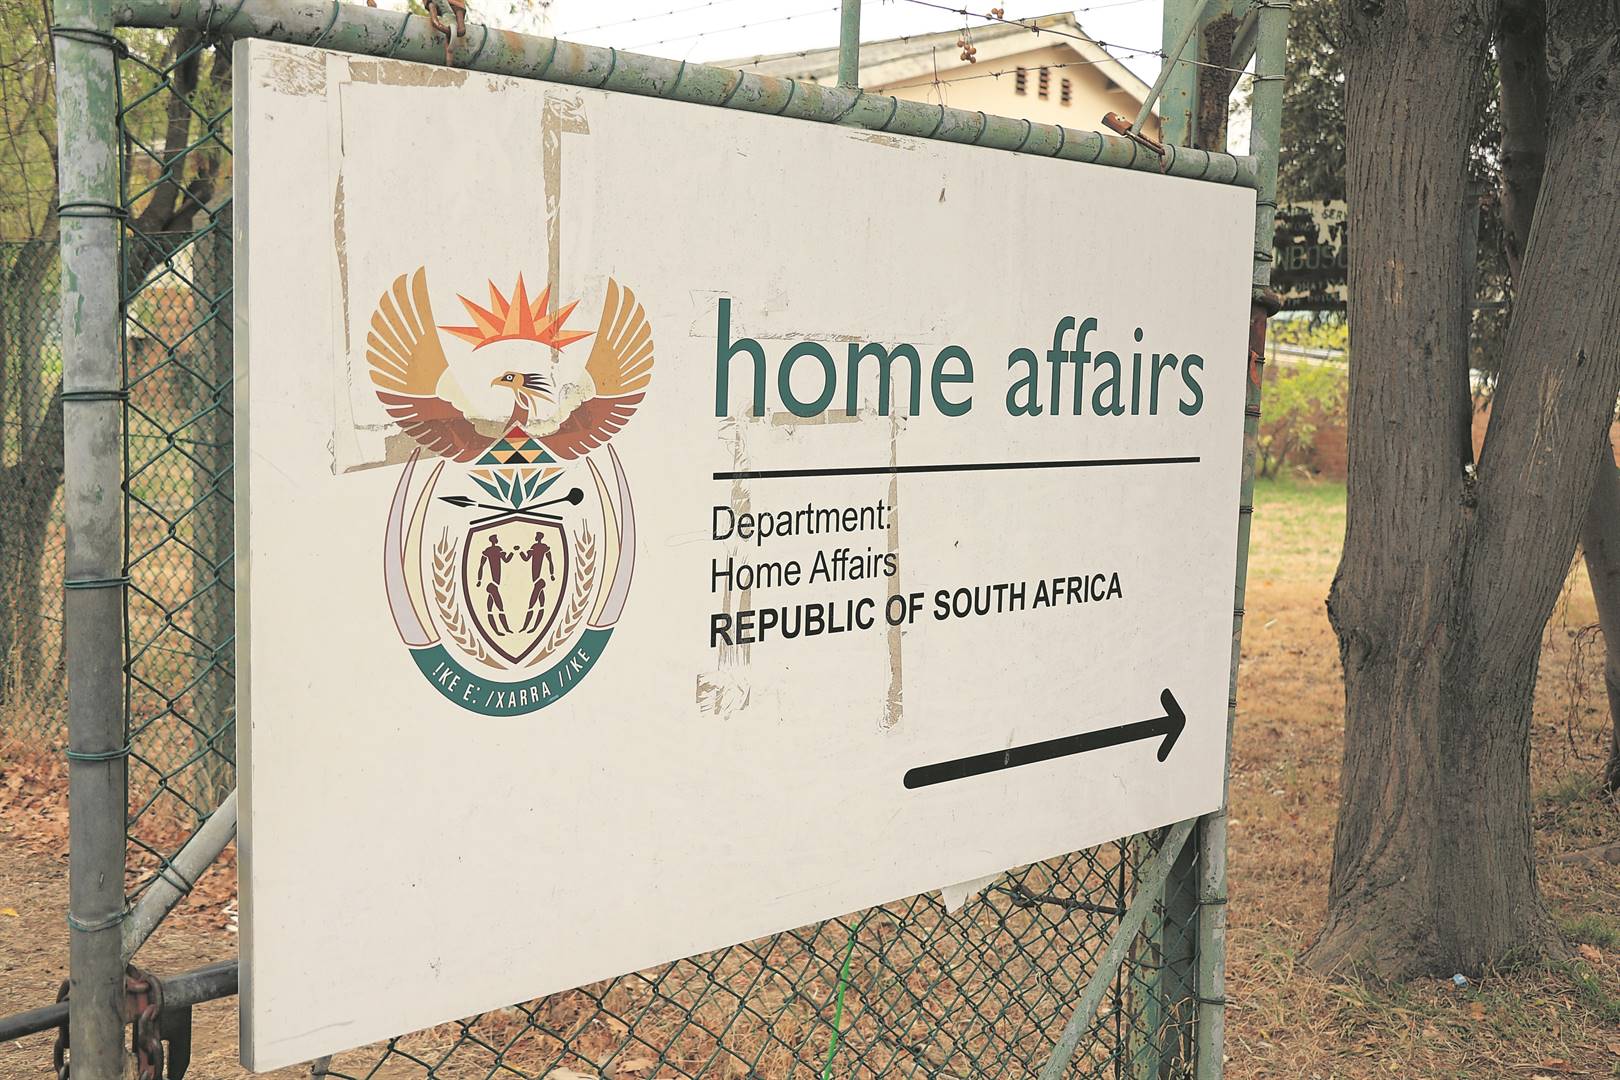 An autistic teenager has finally applied for an identity document after a Home Affairs branch in KwaZulu-Natal had previously refused to help him because he could not speak isiZulu.